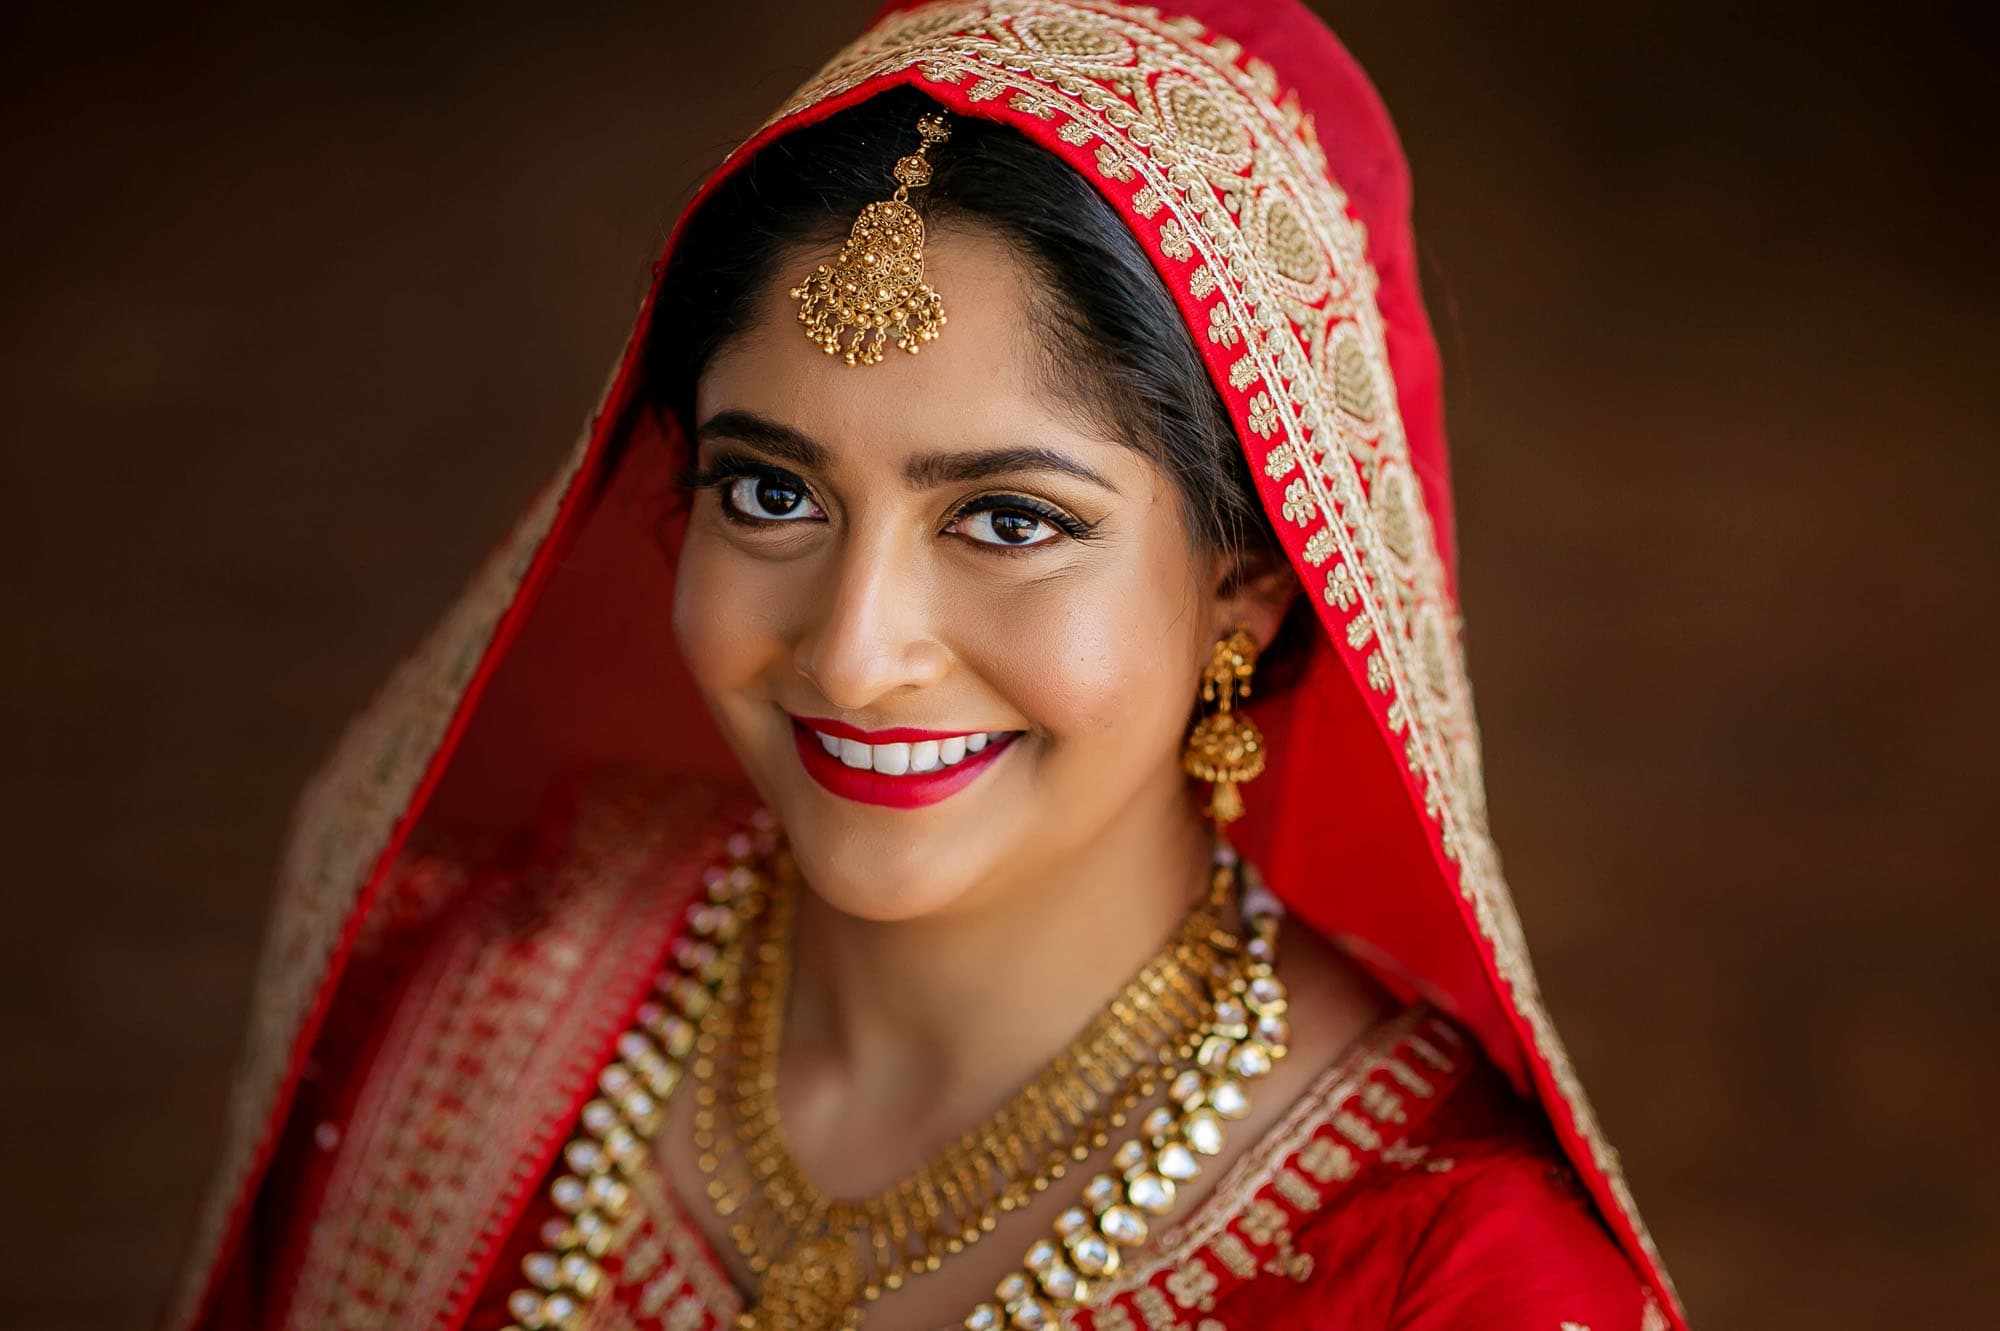 The bride is ready for her traditional Hindu Muslim wedding ceremony.